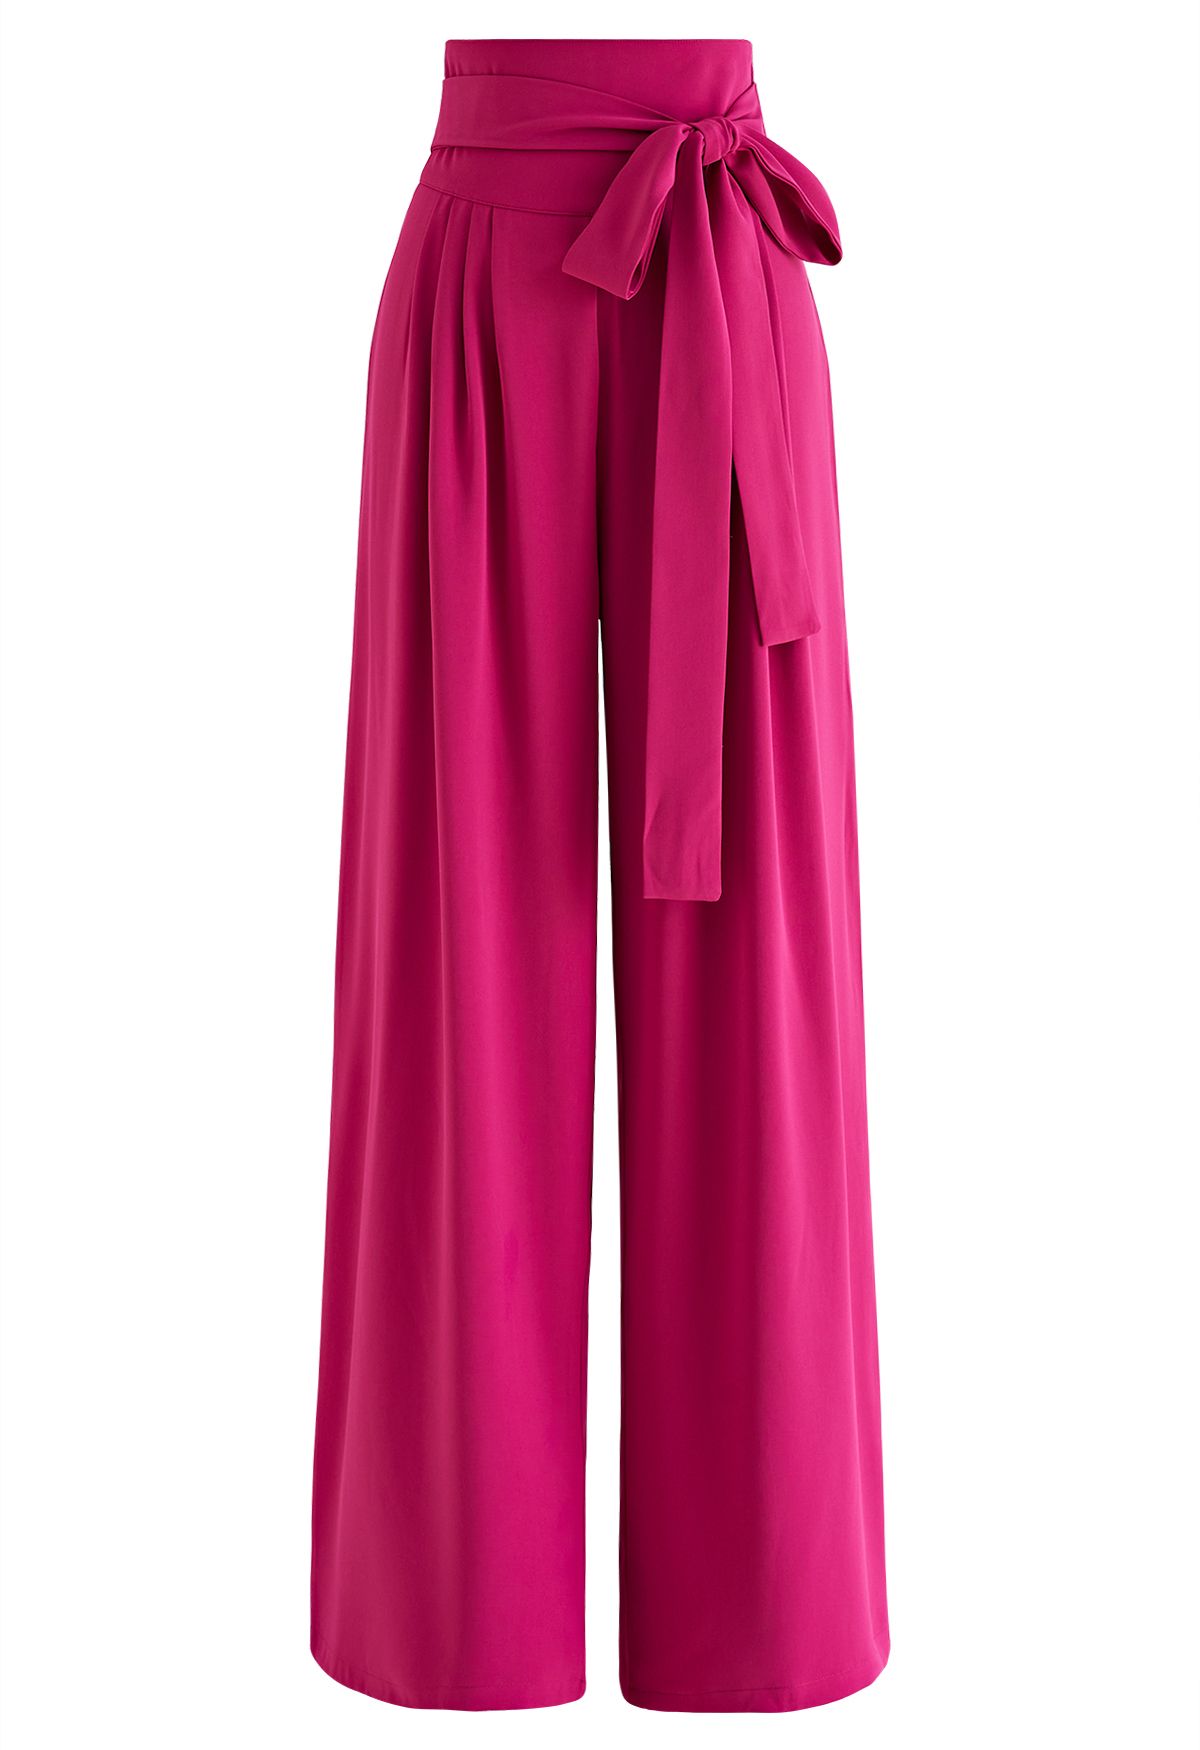 Bowknot High Waist Wide-Leg Pants in Magenta - Retro, Indie and Unique  Fashion